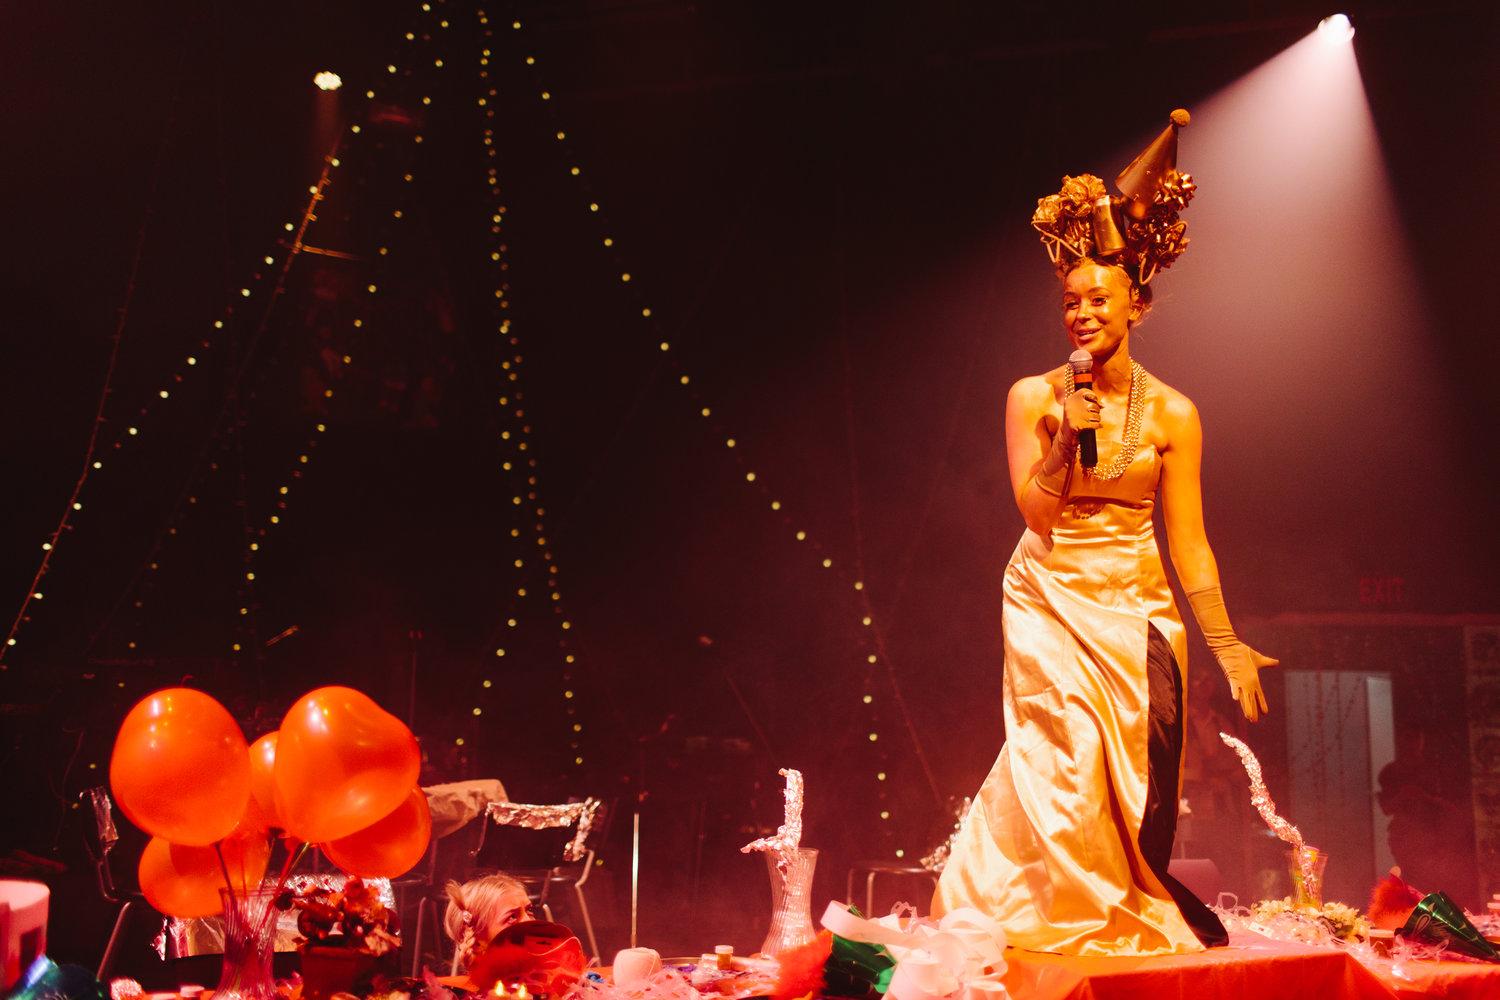 A performer on stage wearing a gown with extravagant head piece speaking to the audience while having starry lighting strings and balloons in the background